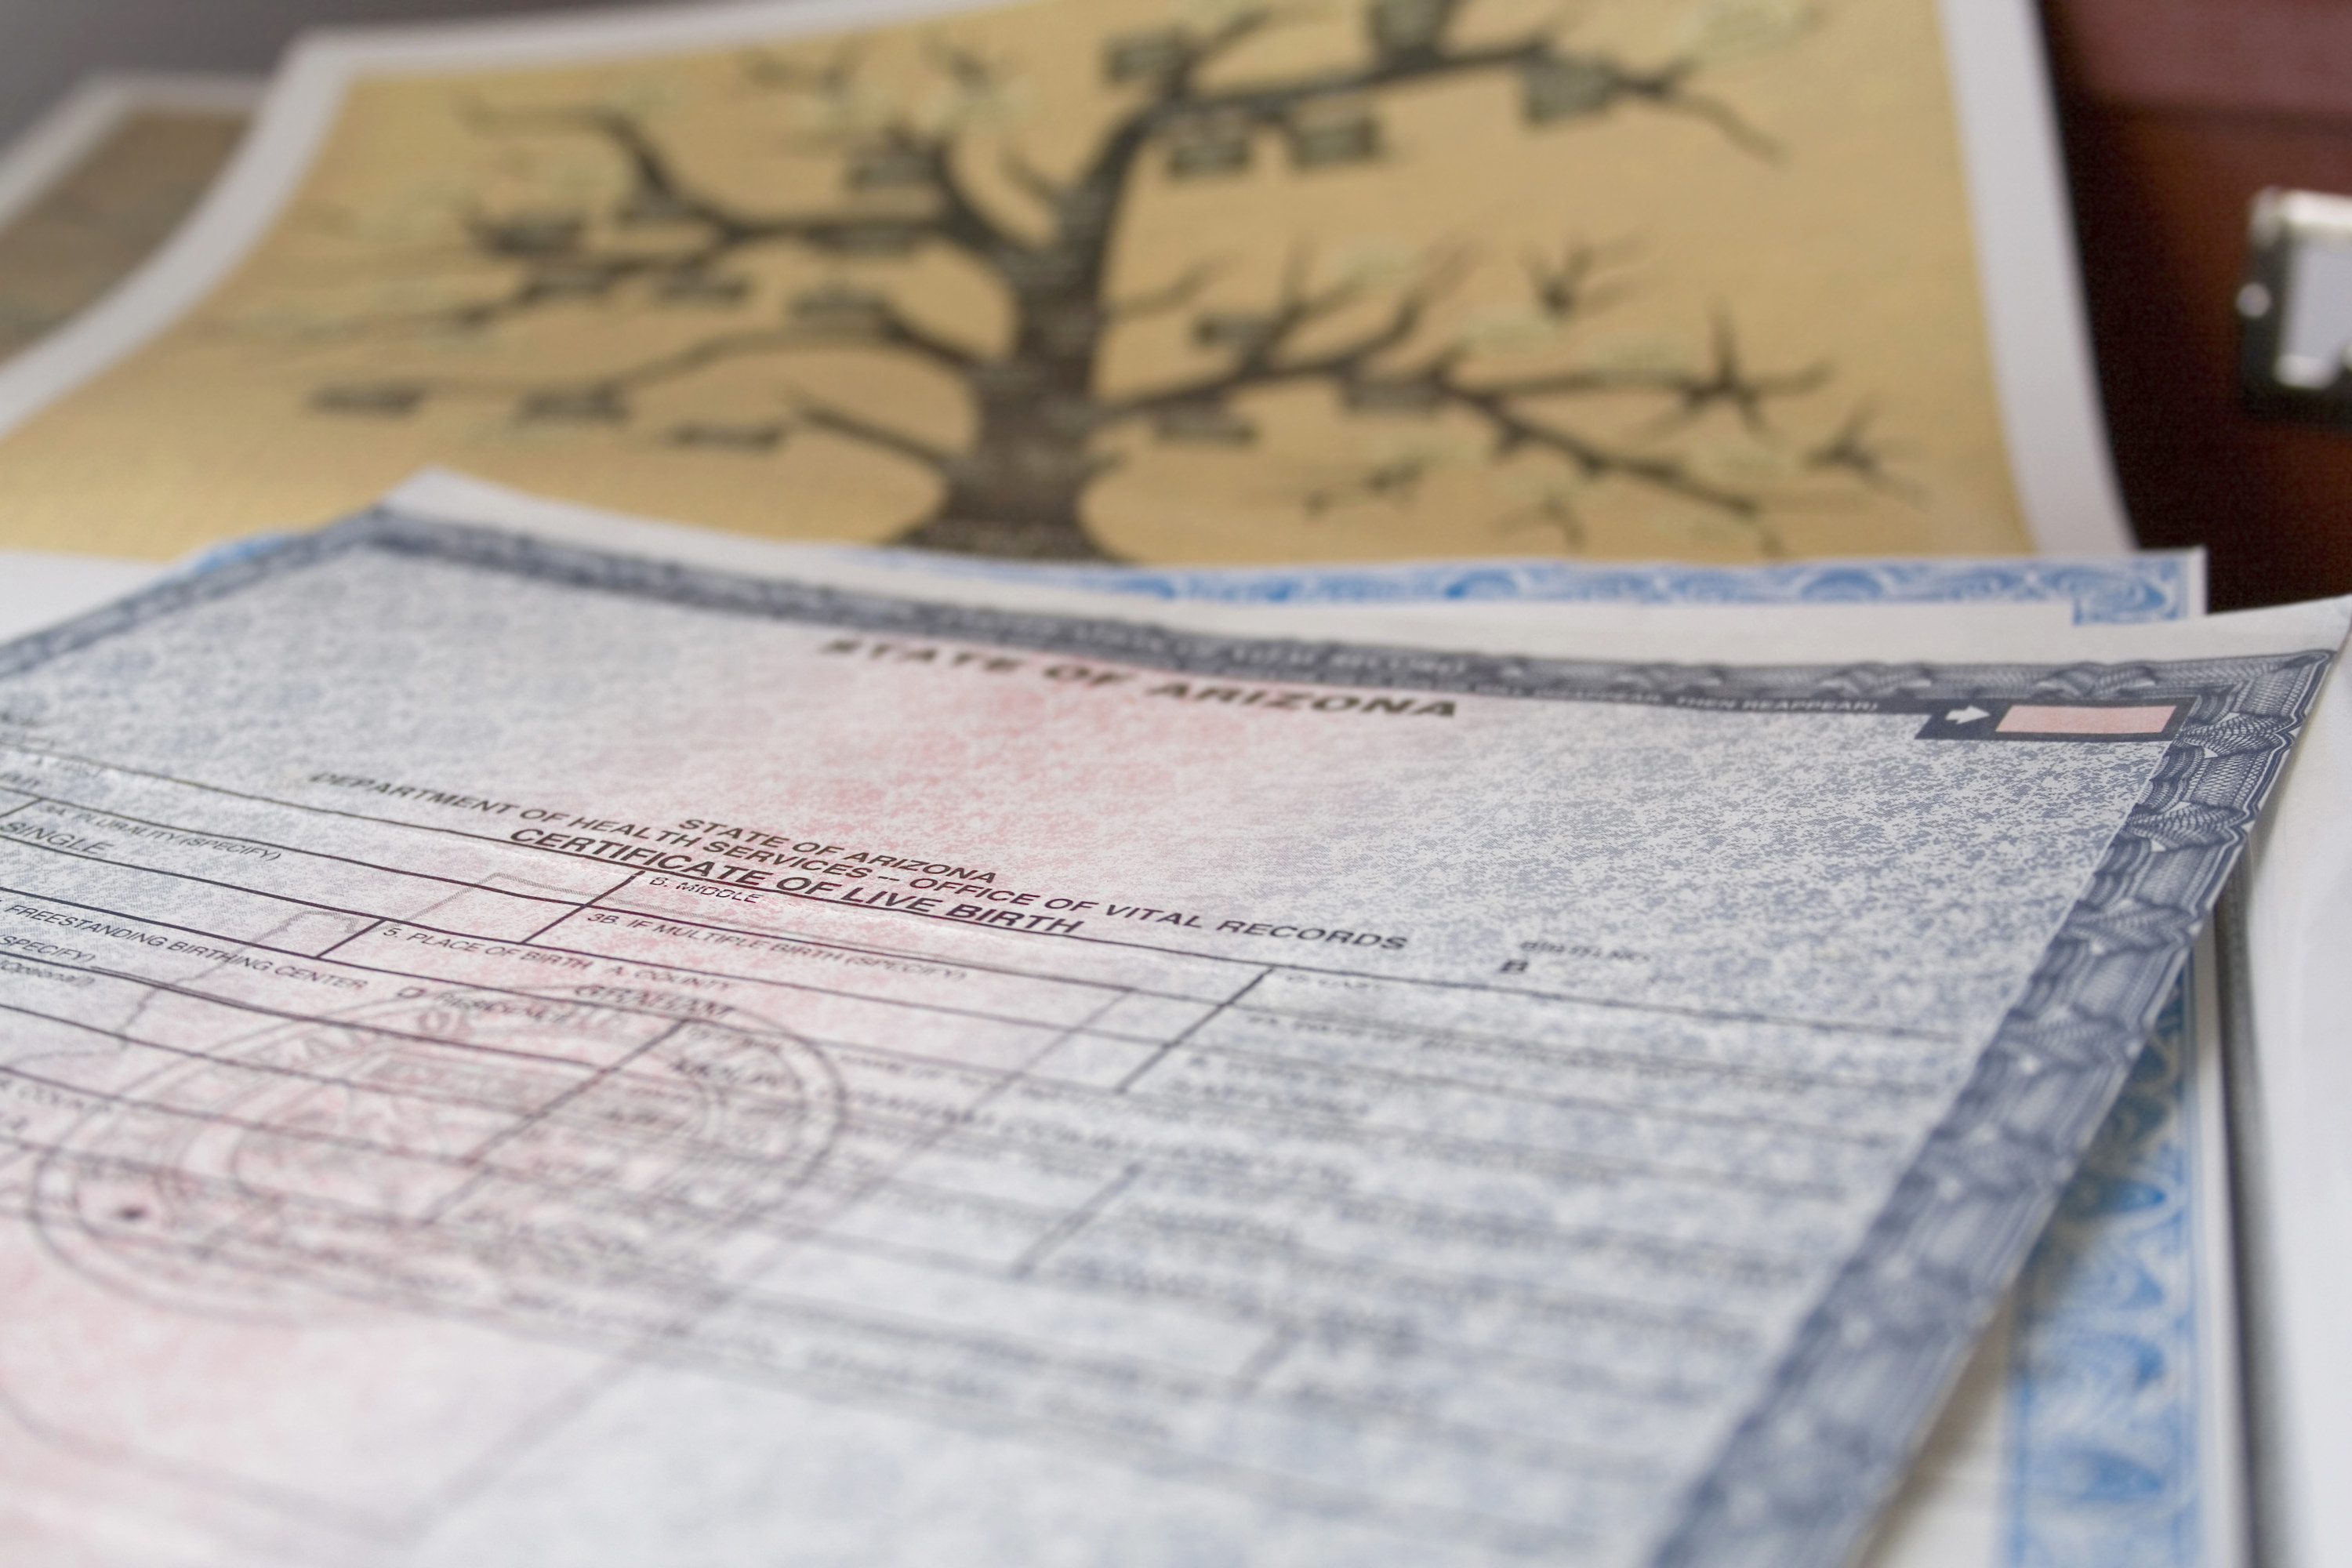 Close-up of birth certificate with family tree document in the background